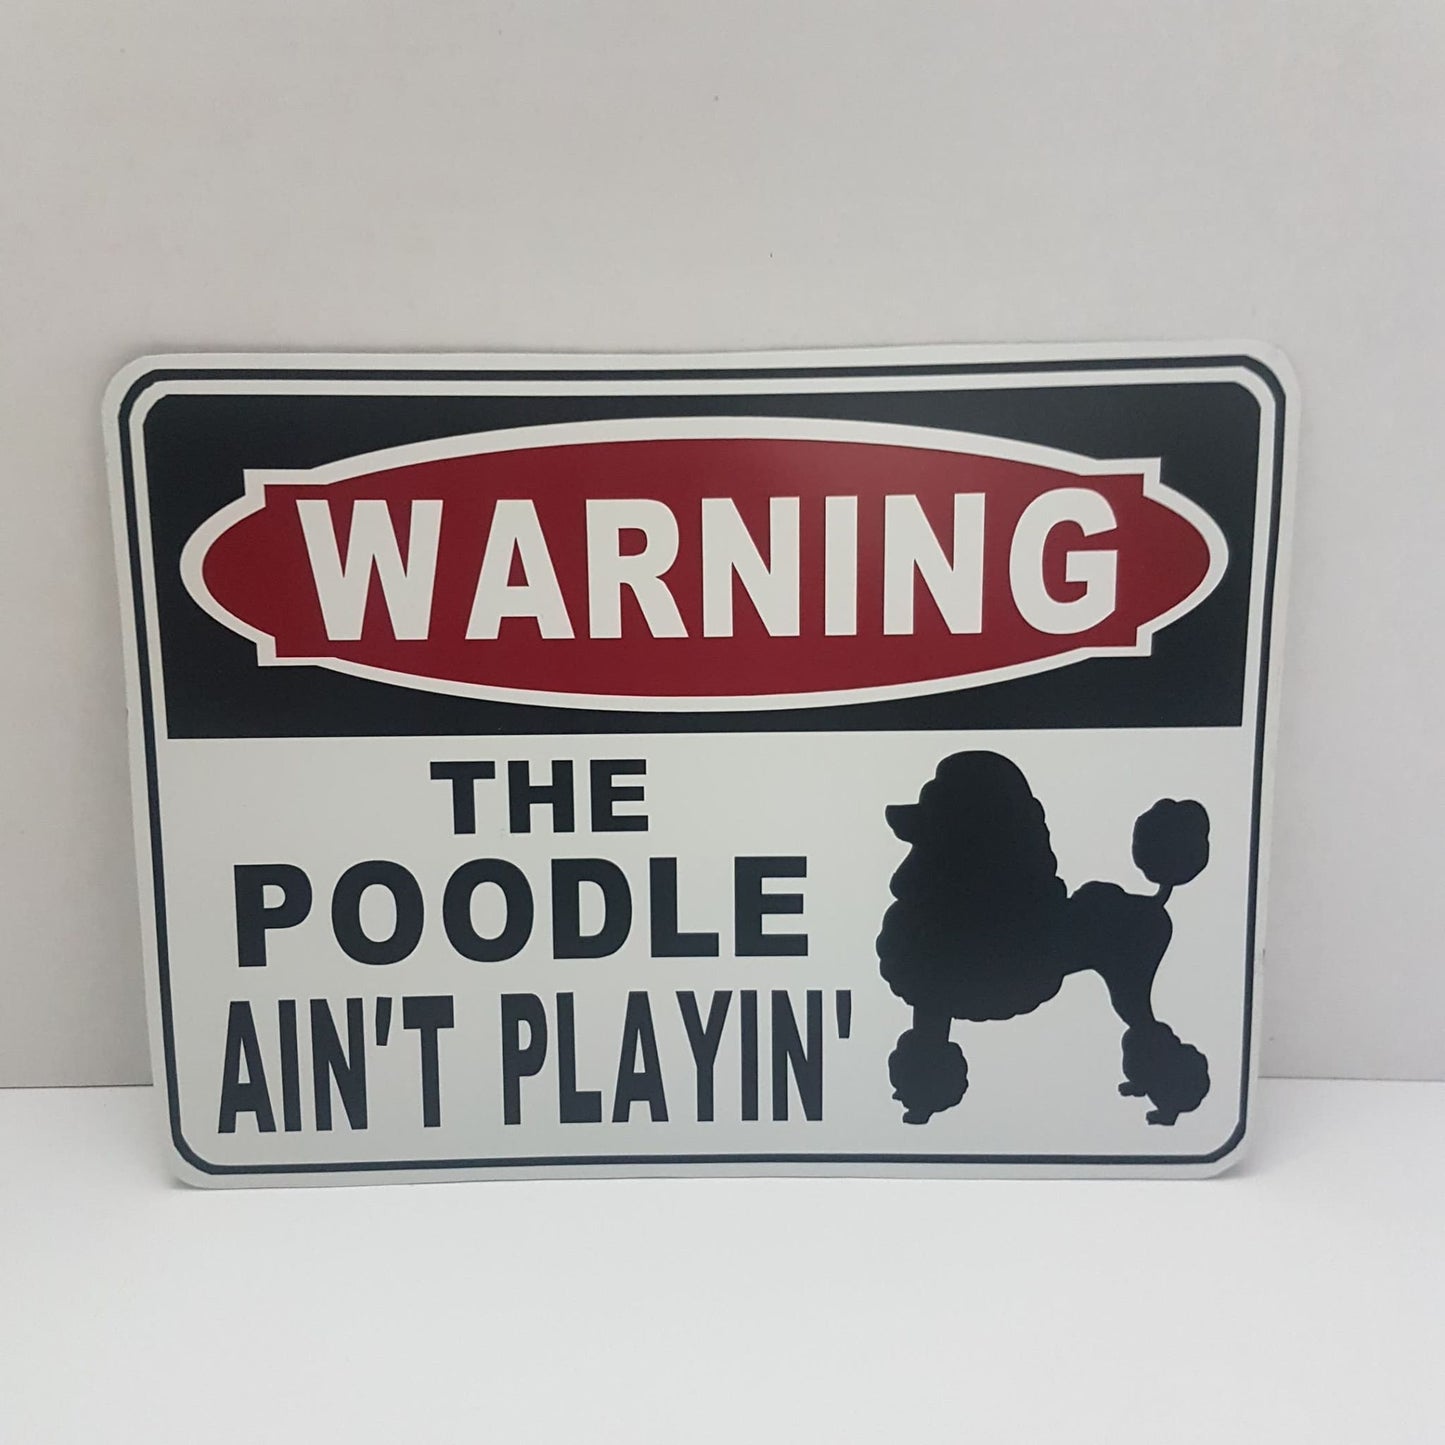 warning the poodle ain't playin' funny sign